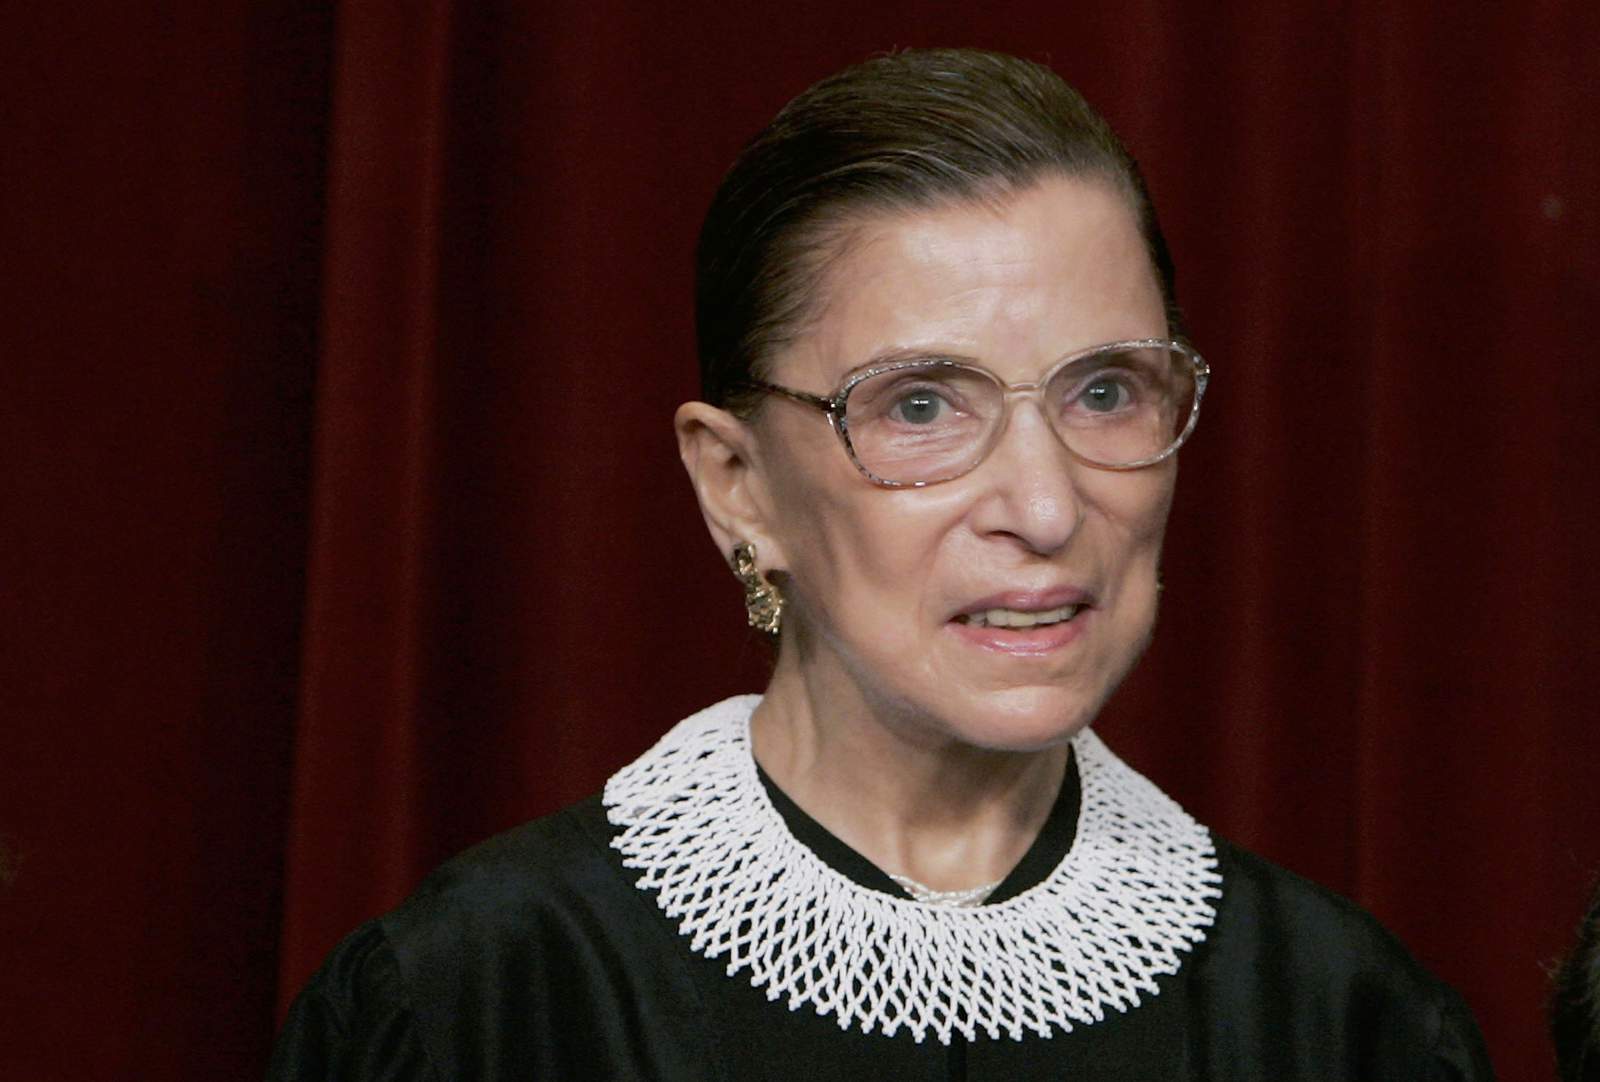 These movies and docs will teach you more about Ruth Bader Ginsburg’s historic legacy